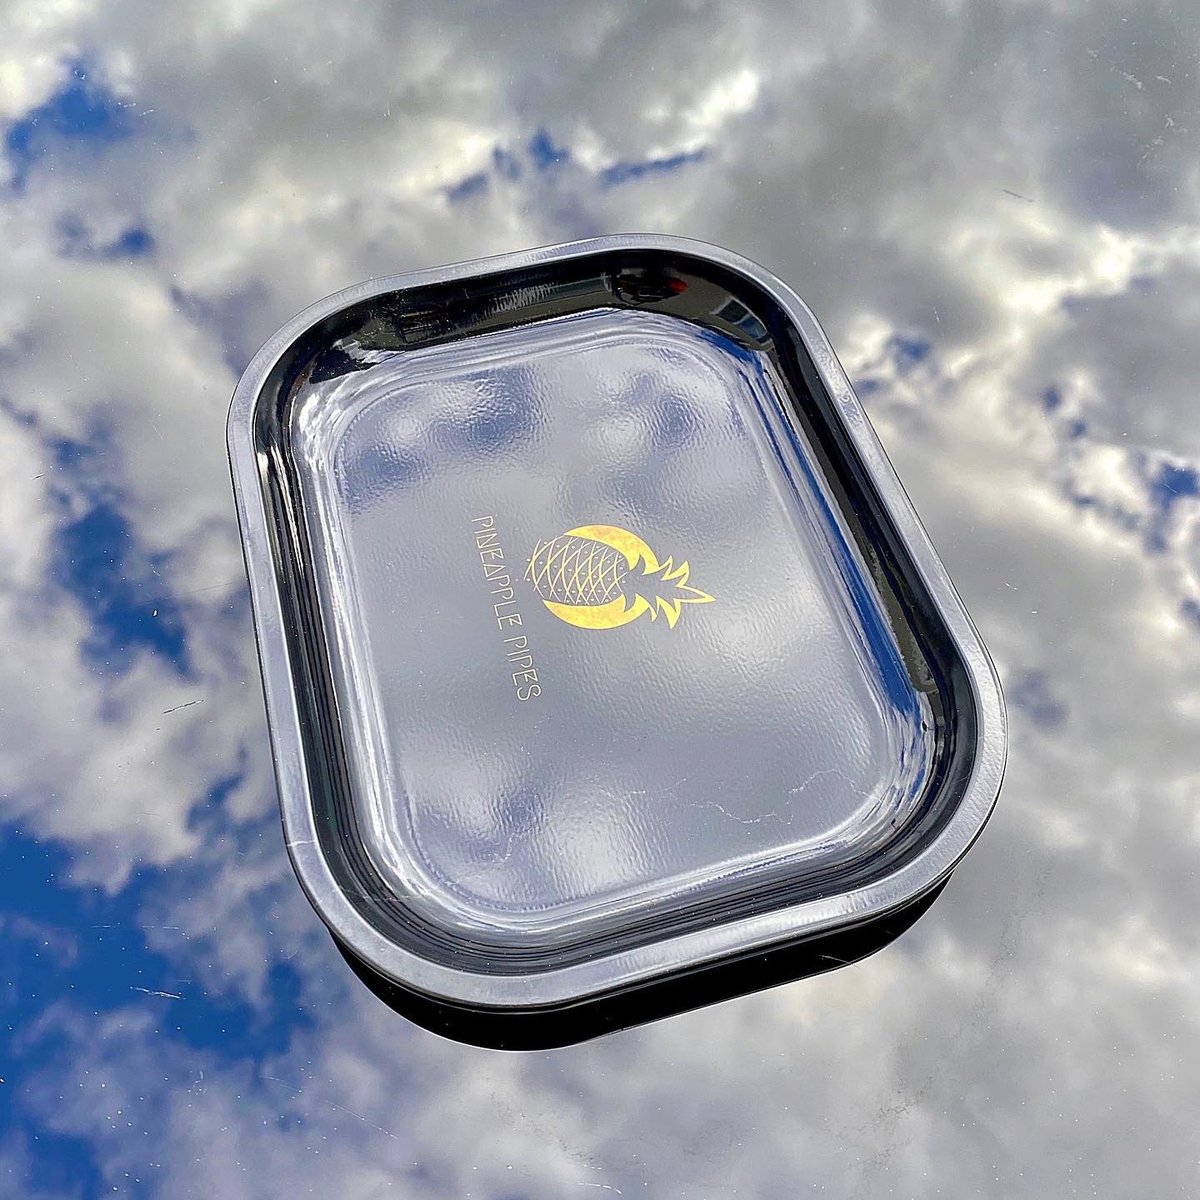 Image of Black Marble Pineapple Logo Rolling Tray